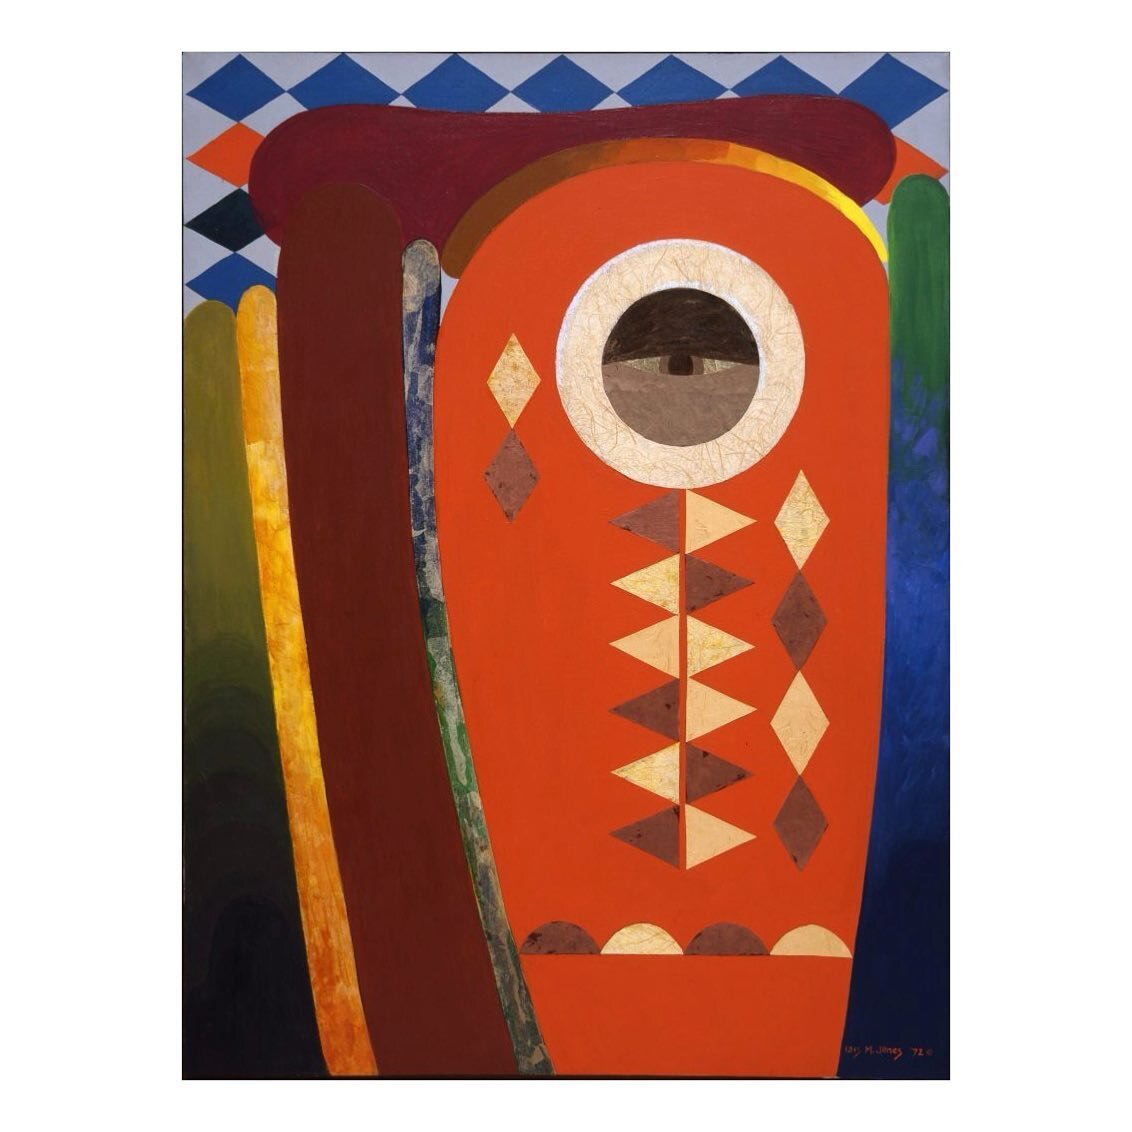 &ldquo;In Ode to Kinshasa, Jones adapted the triangle and diamond patterns painted onto traditional masks by artists in many West and Central African communities; the eye in the center of Jones&rsquo;s composition refers to her source of inspiration.